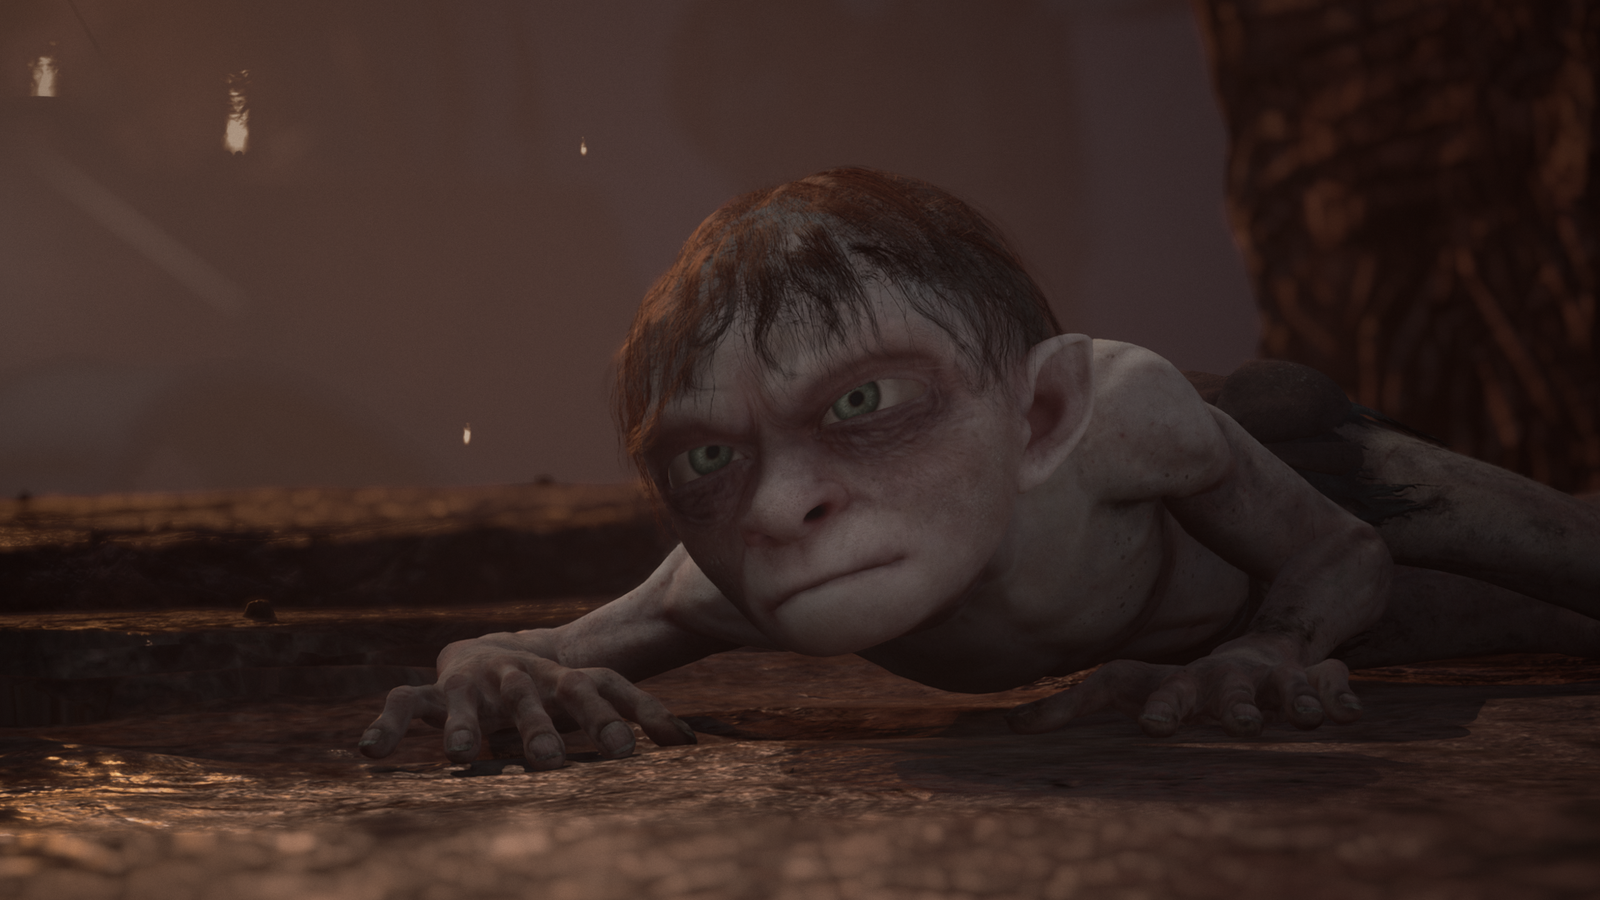 The Lord of the Rings: Gollum - First Reviews w/ Metacritic & OpenCritic  Score REACTION 